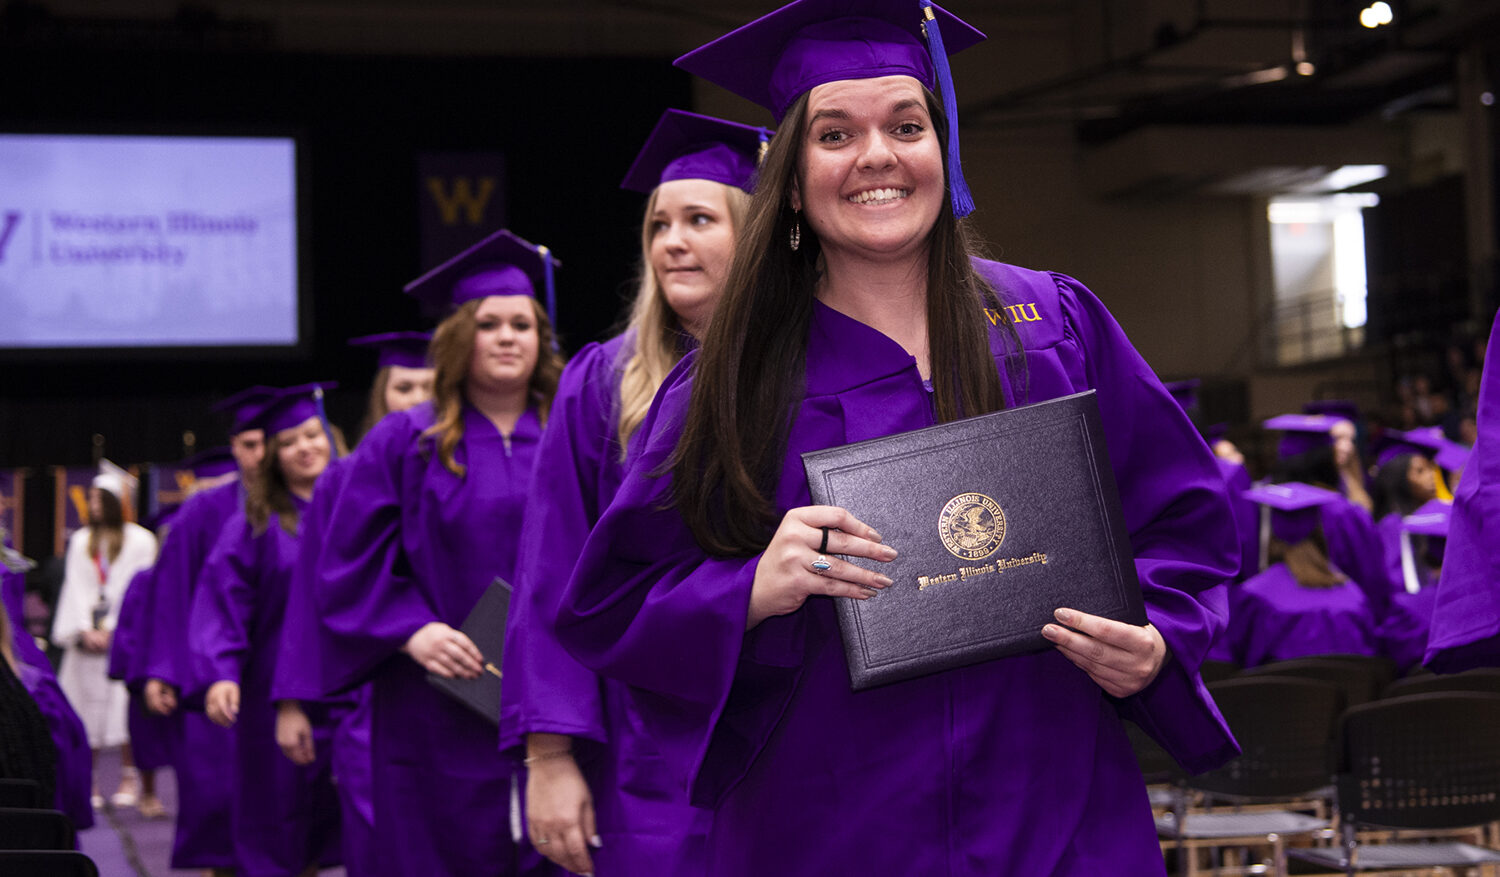 WIU awards 1,024 students with academic degrees, post baccalaureate certificates at spring commencement – Muddy River News